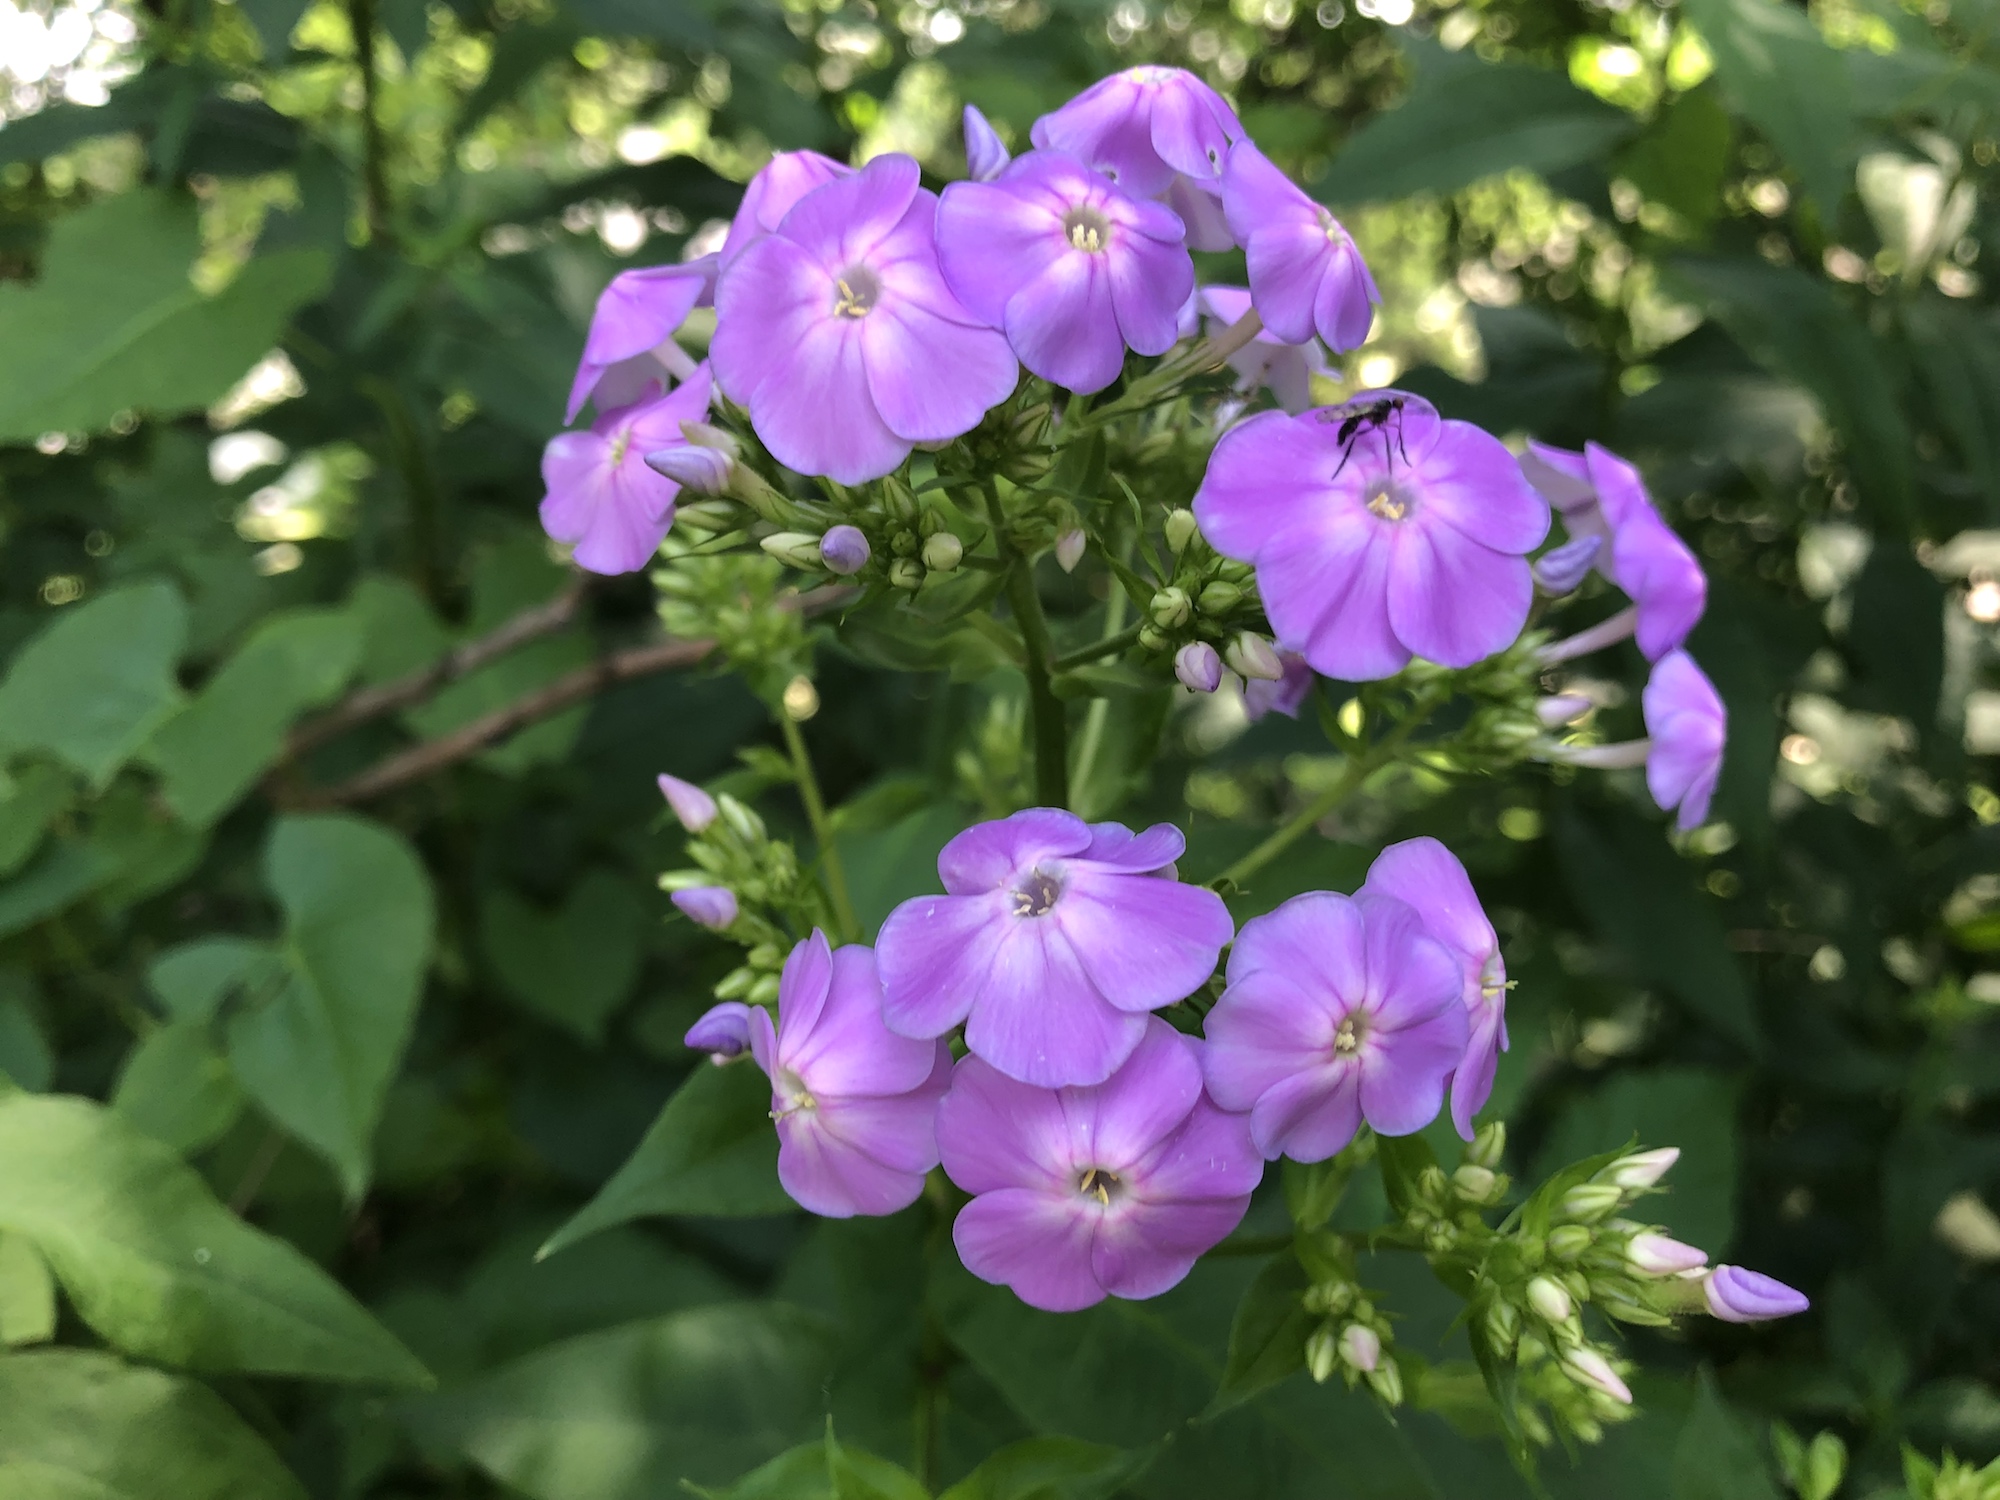 Tall Garden Phlox by Duck Pond on July 8, 2019.